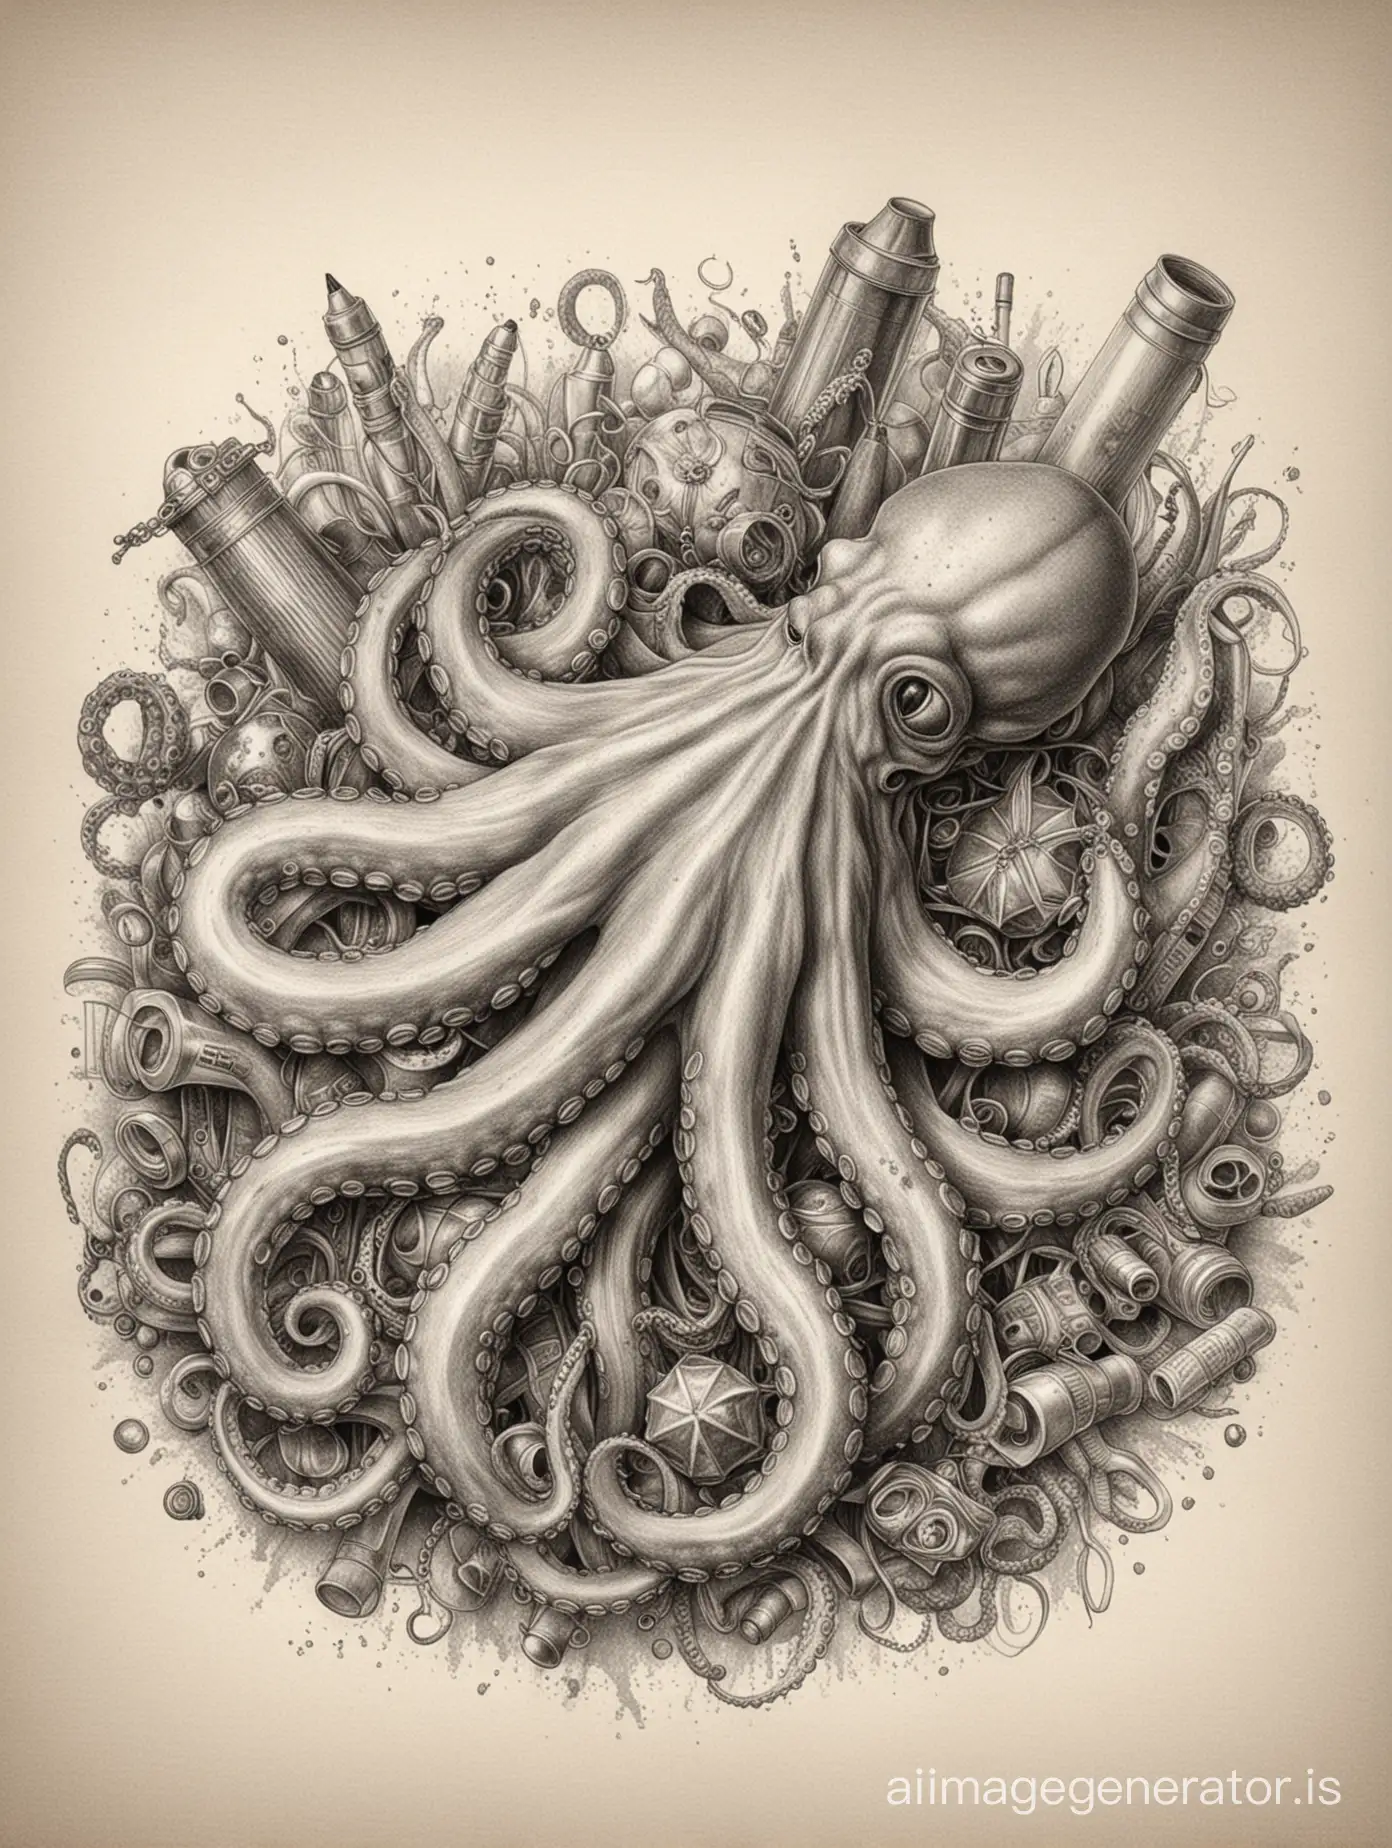 Pencil sketch of Octopus and waste items, ultra realistic drawing style